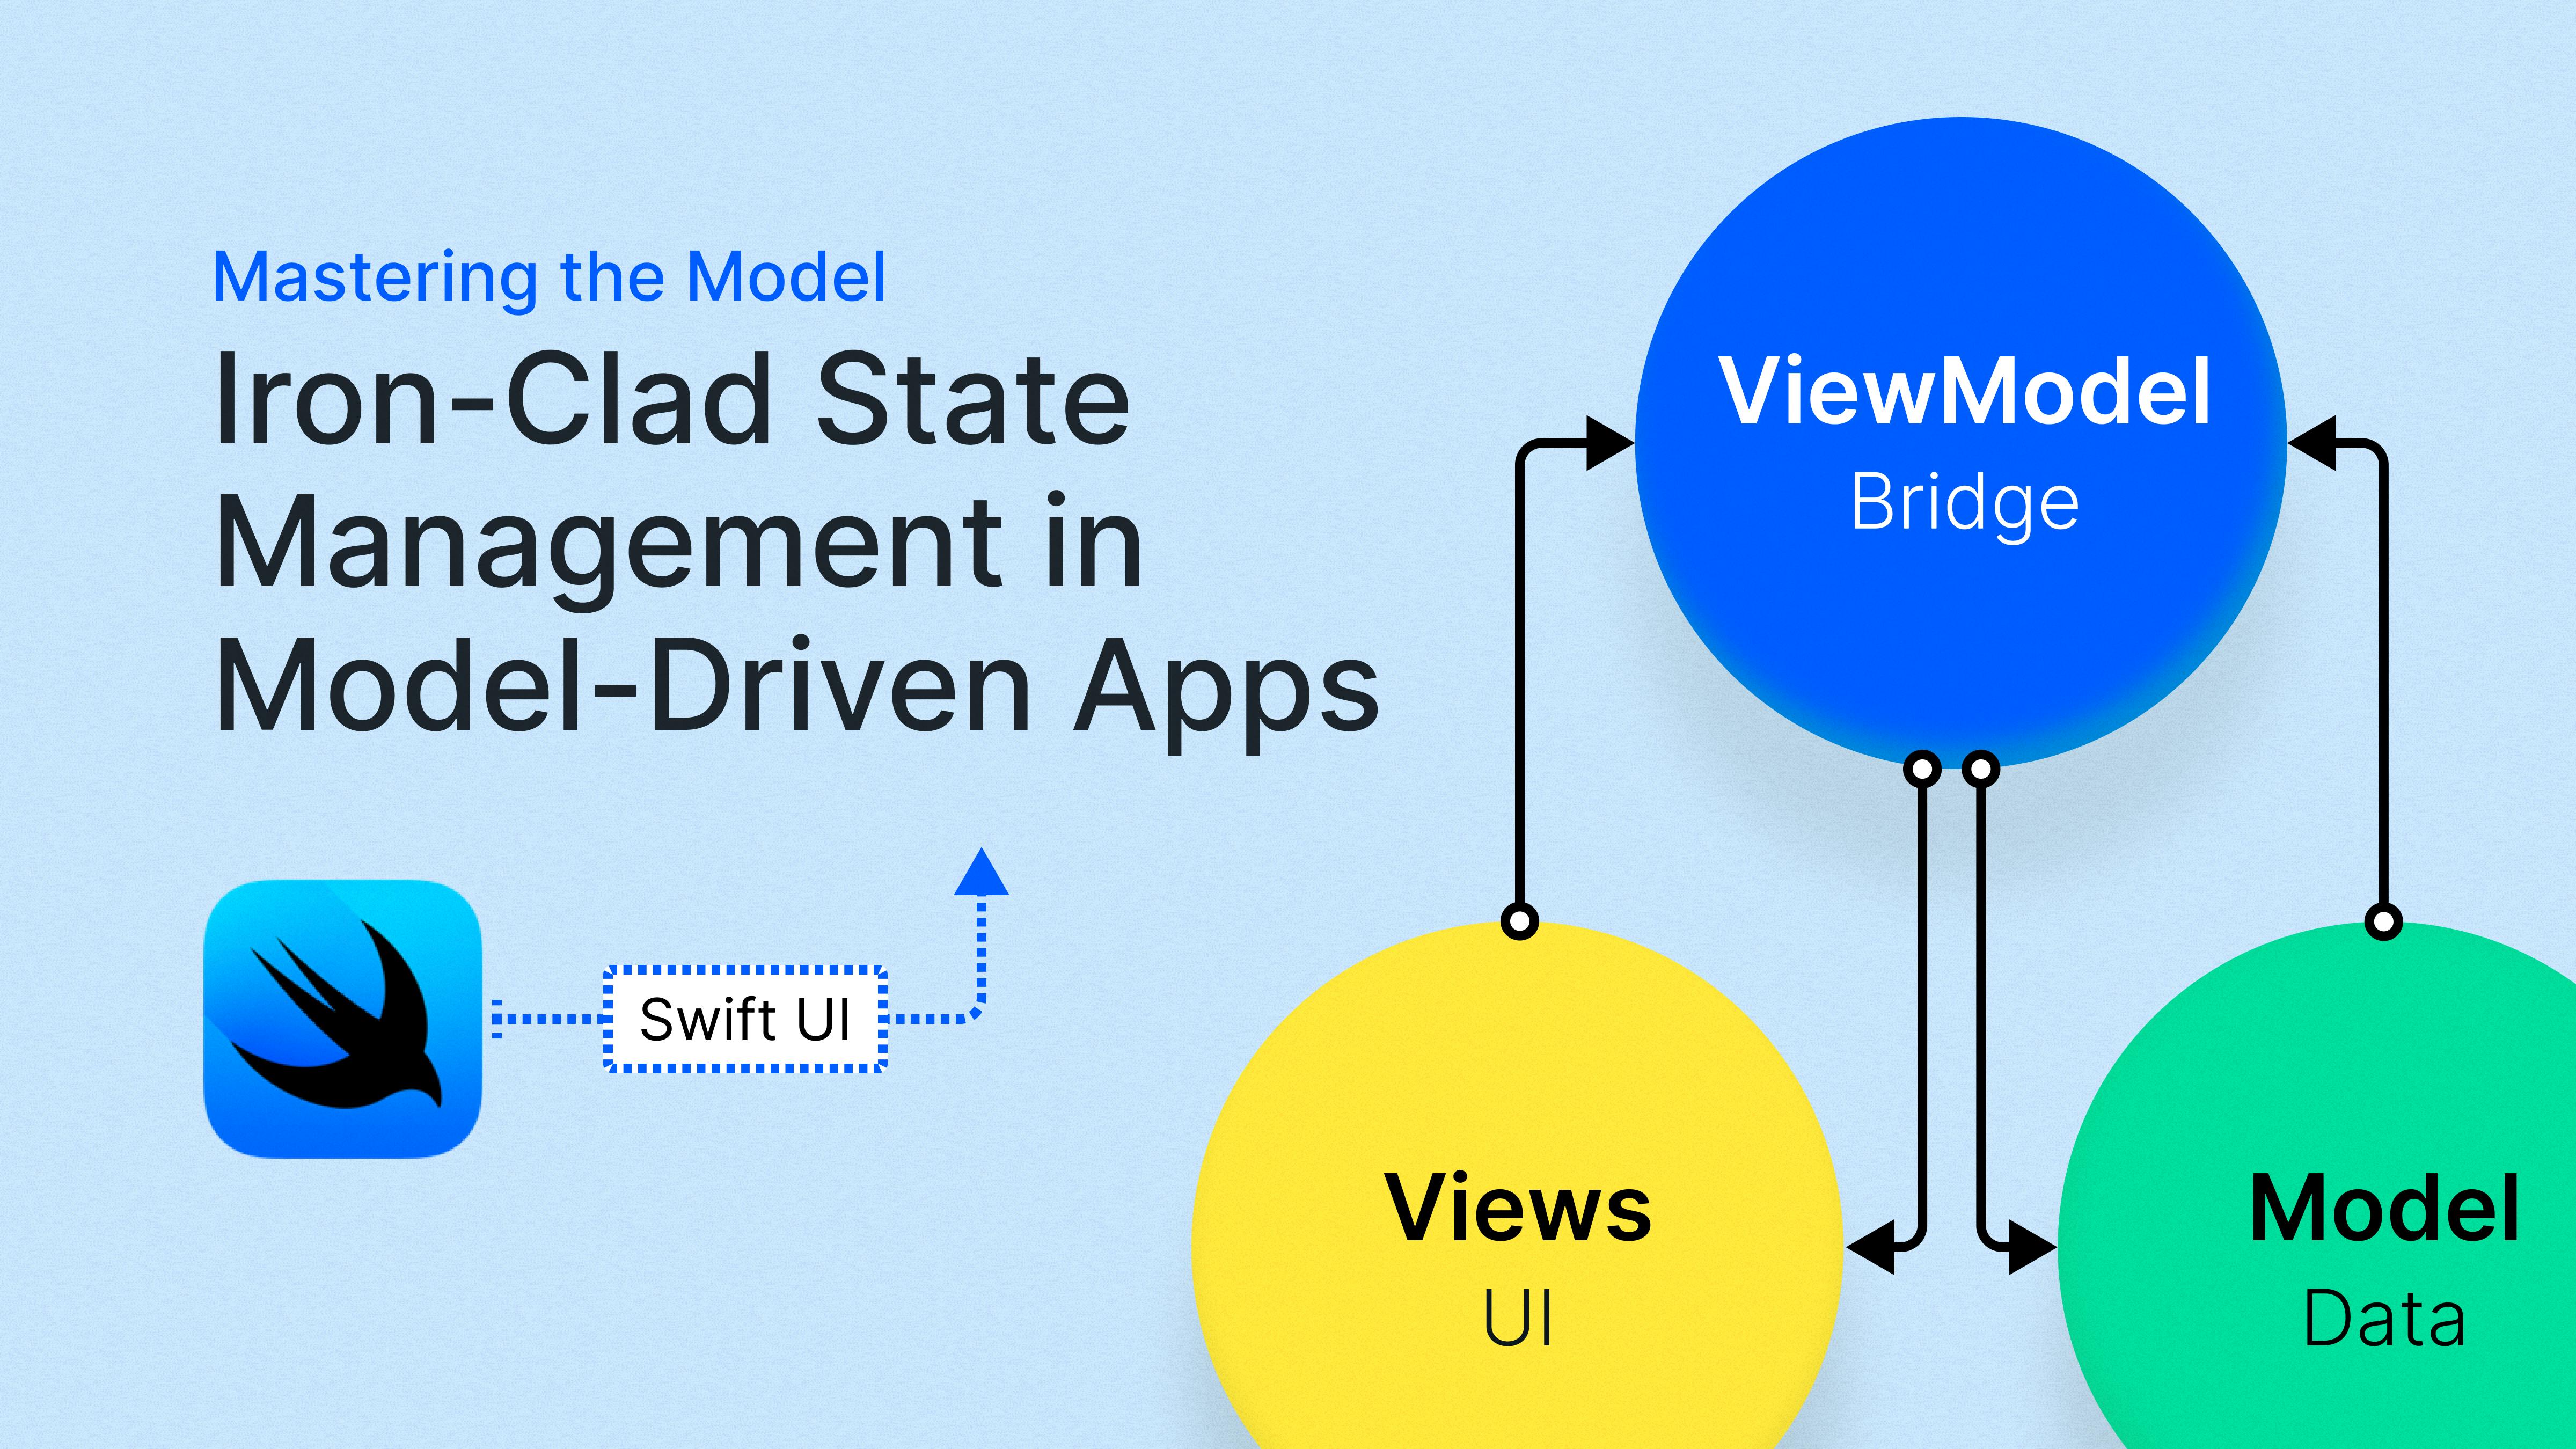 Iron-Clad State Management in Model-Driven Apps